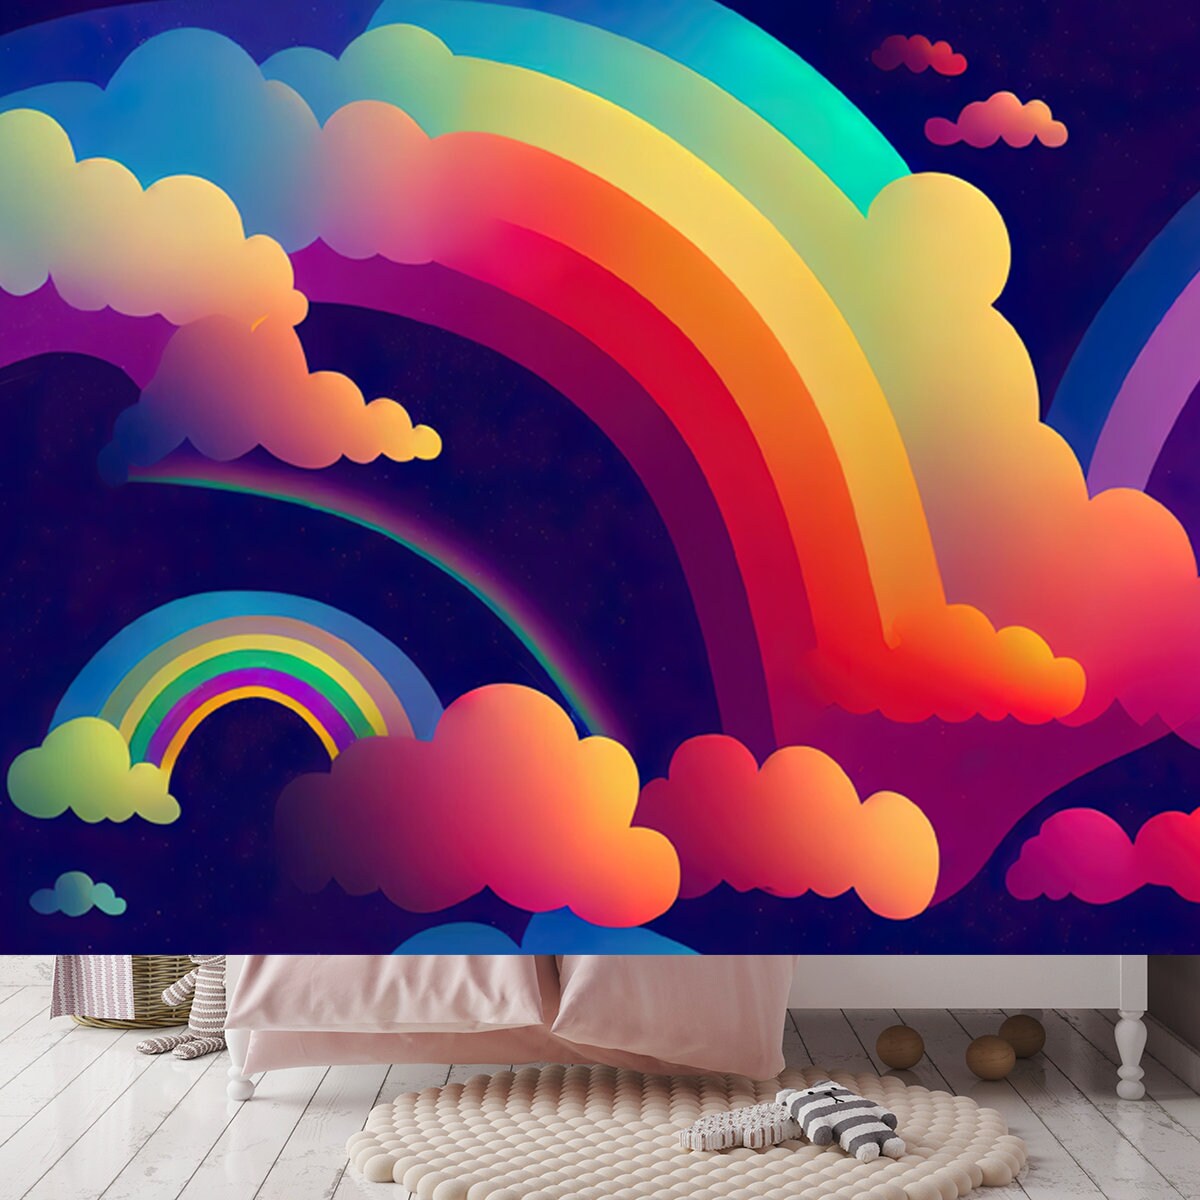 Holographic Fantasy Rainbow Unicorn Background with Clouds. Pastel Color Sky Wallpaper Girl Bedroom Mural